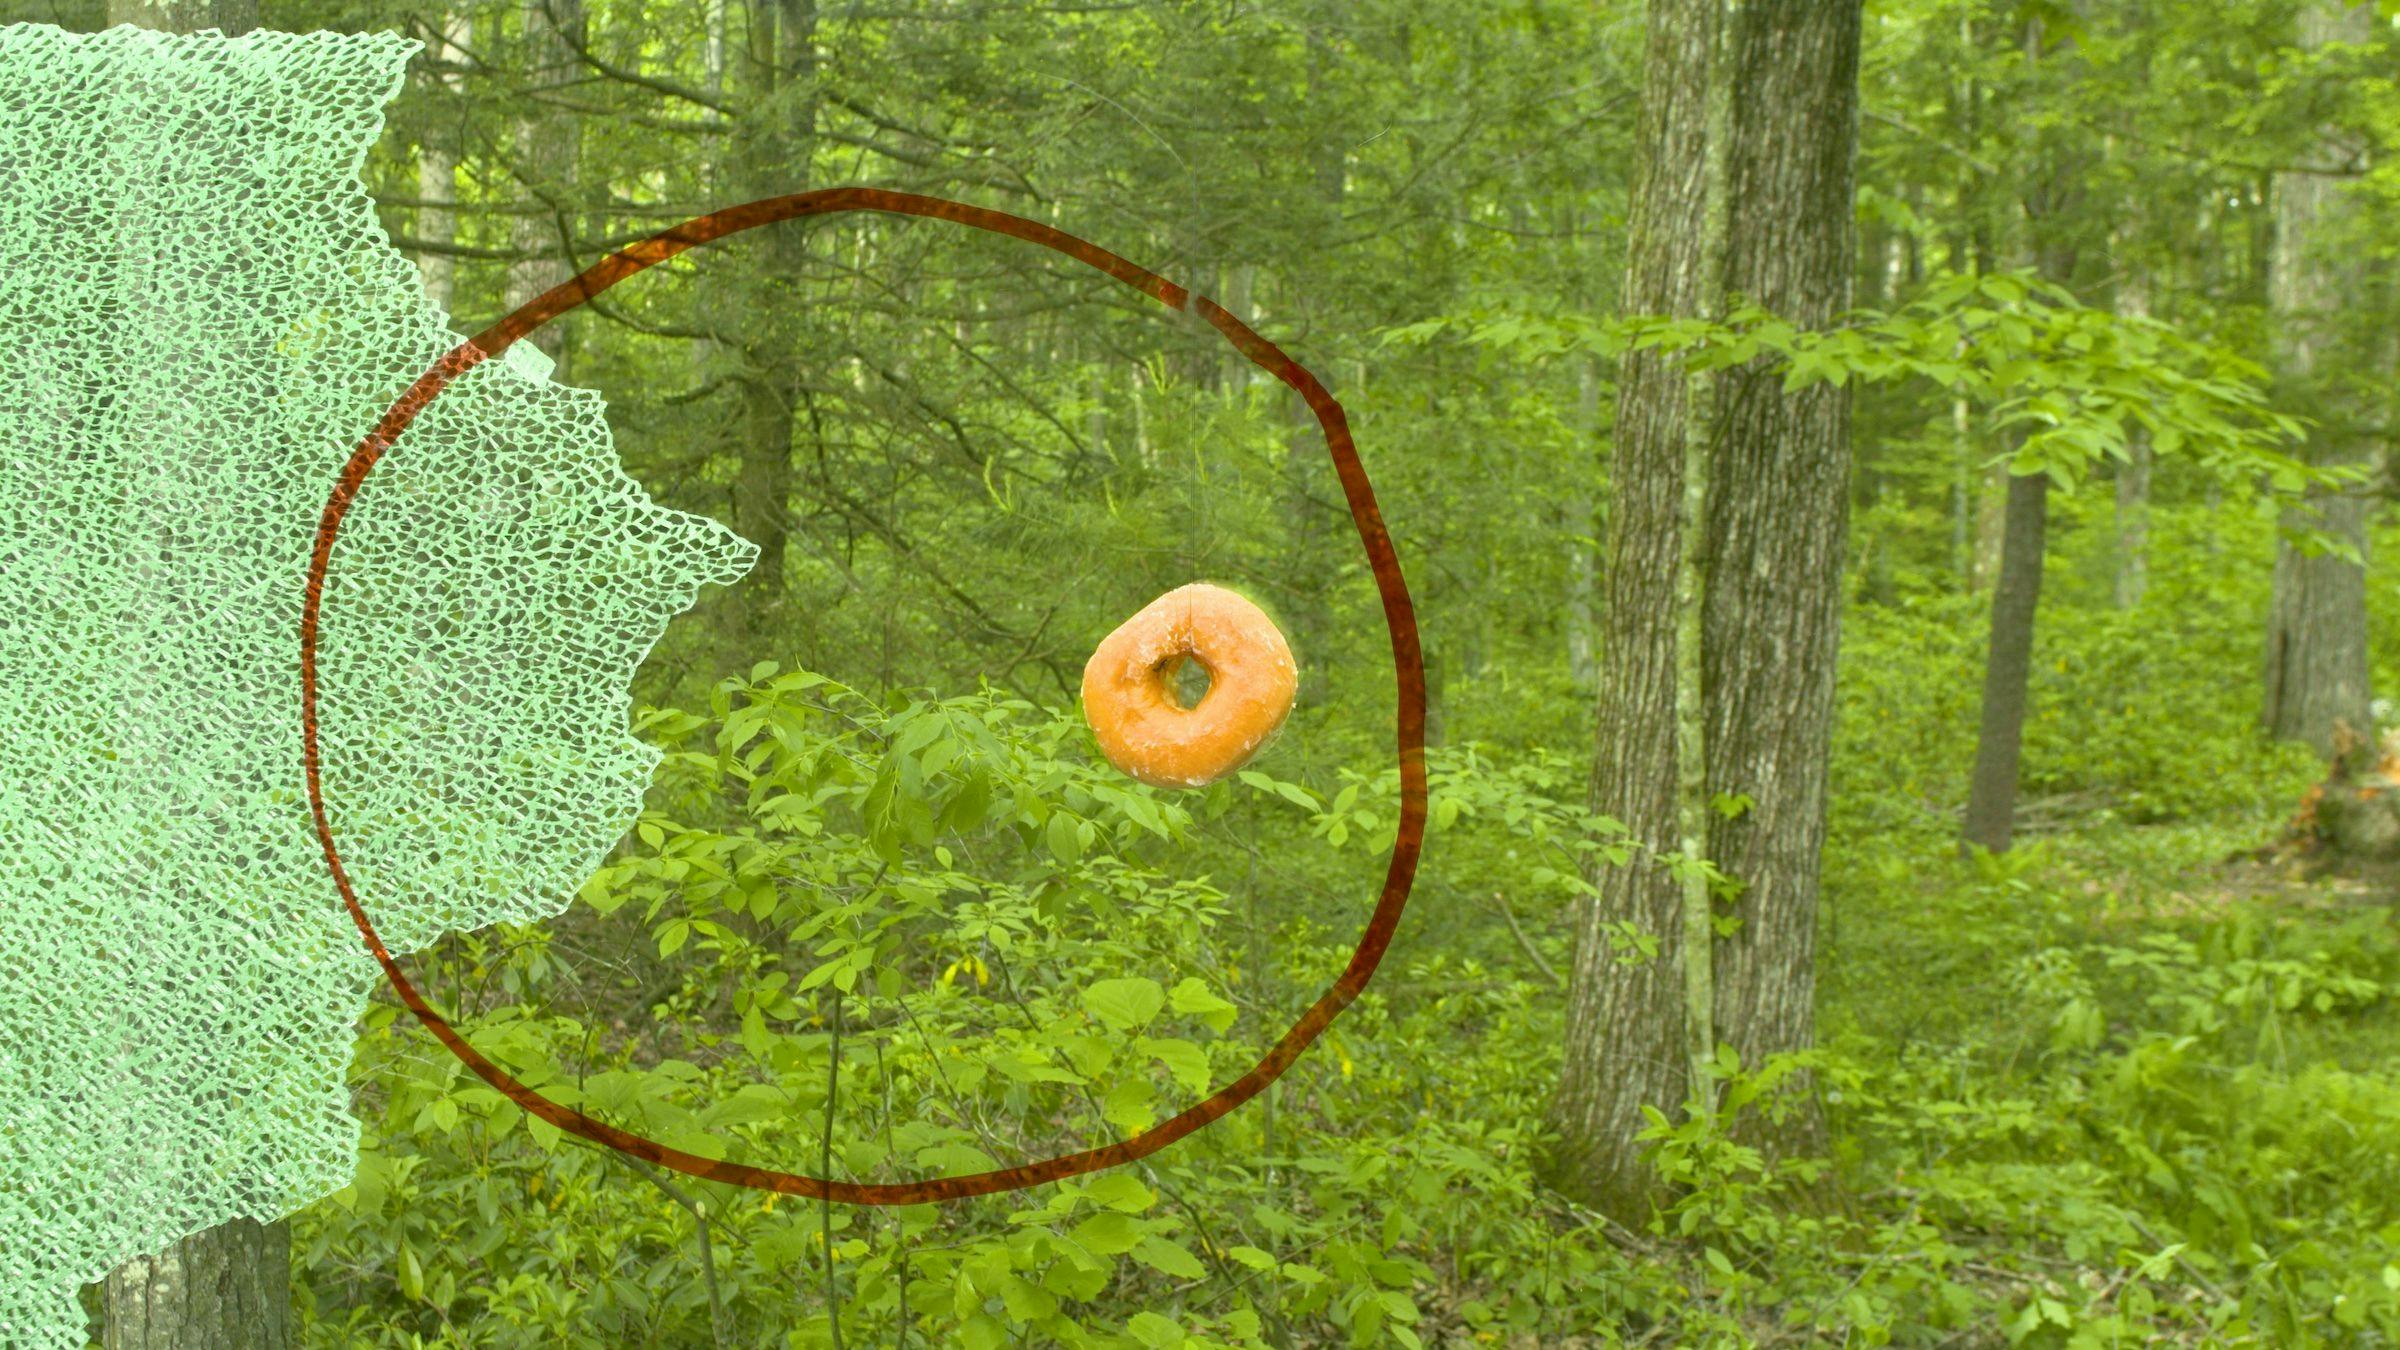 A red circle has been drawn on the camera lens and it has a doughnut inside it. The left hand side of the lens has been shattered. The camera is filming a scene in a forest.